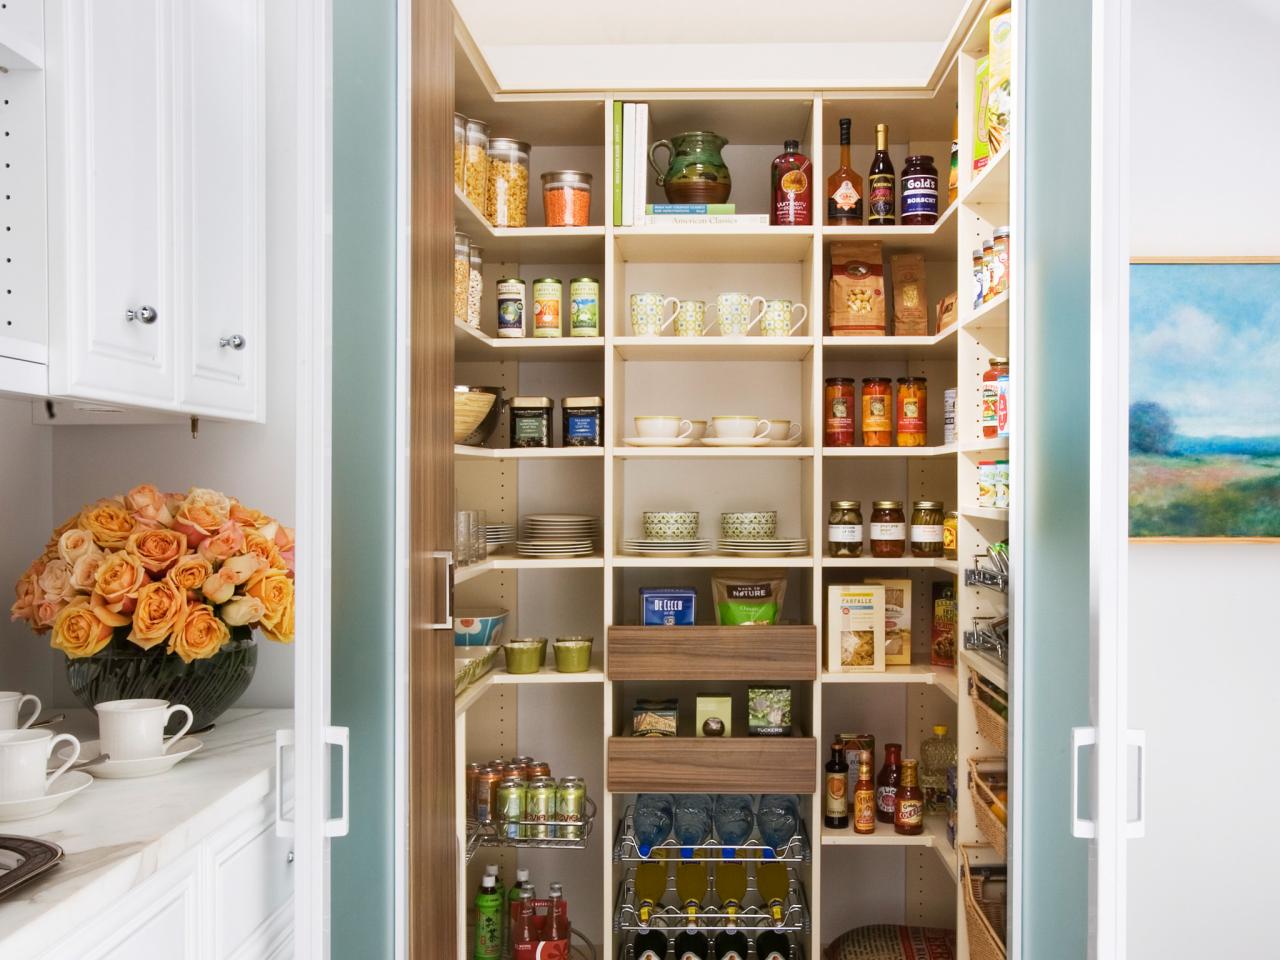 Pantry Cabinet Plans Pictures Ideas, Kitchen Cabinet Pantry Design